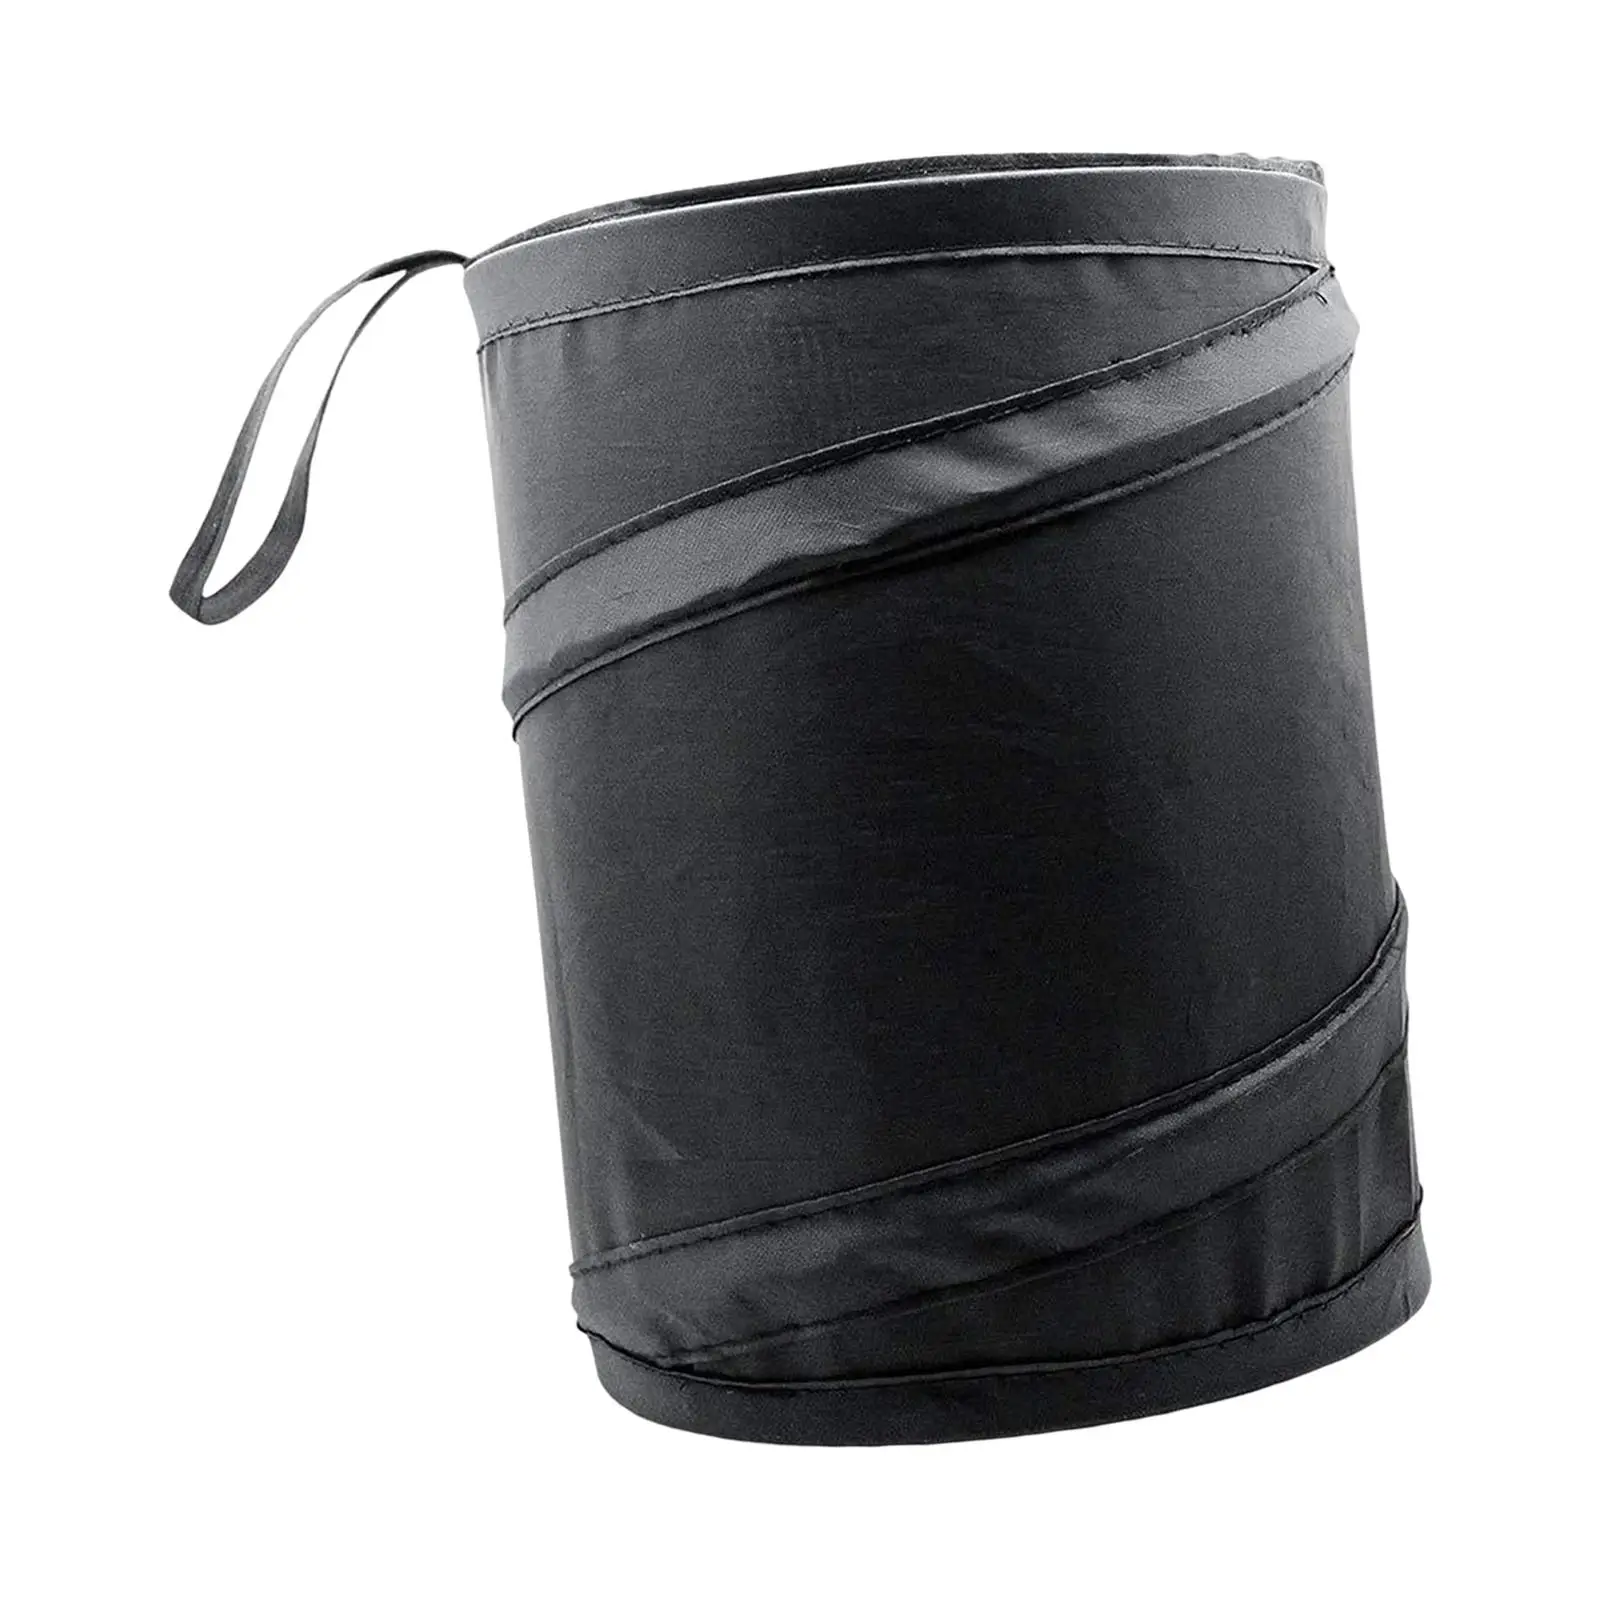 Portable Car Trash Can Storage Bag Dustbin for SUV Camping Living Room